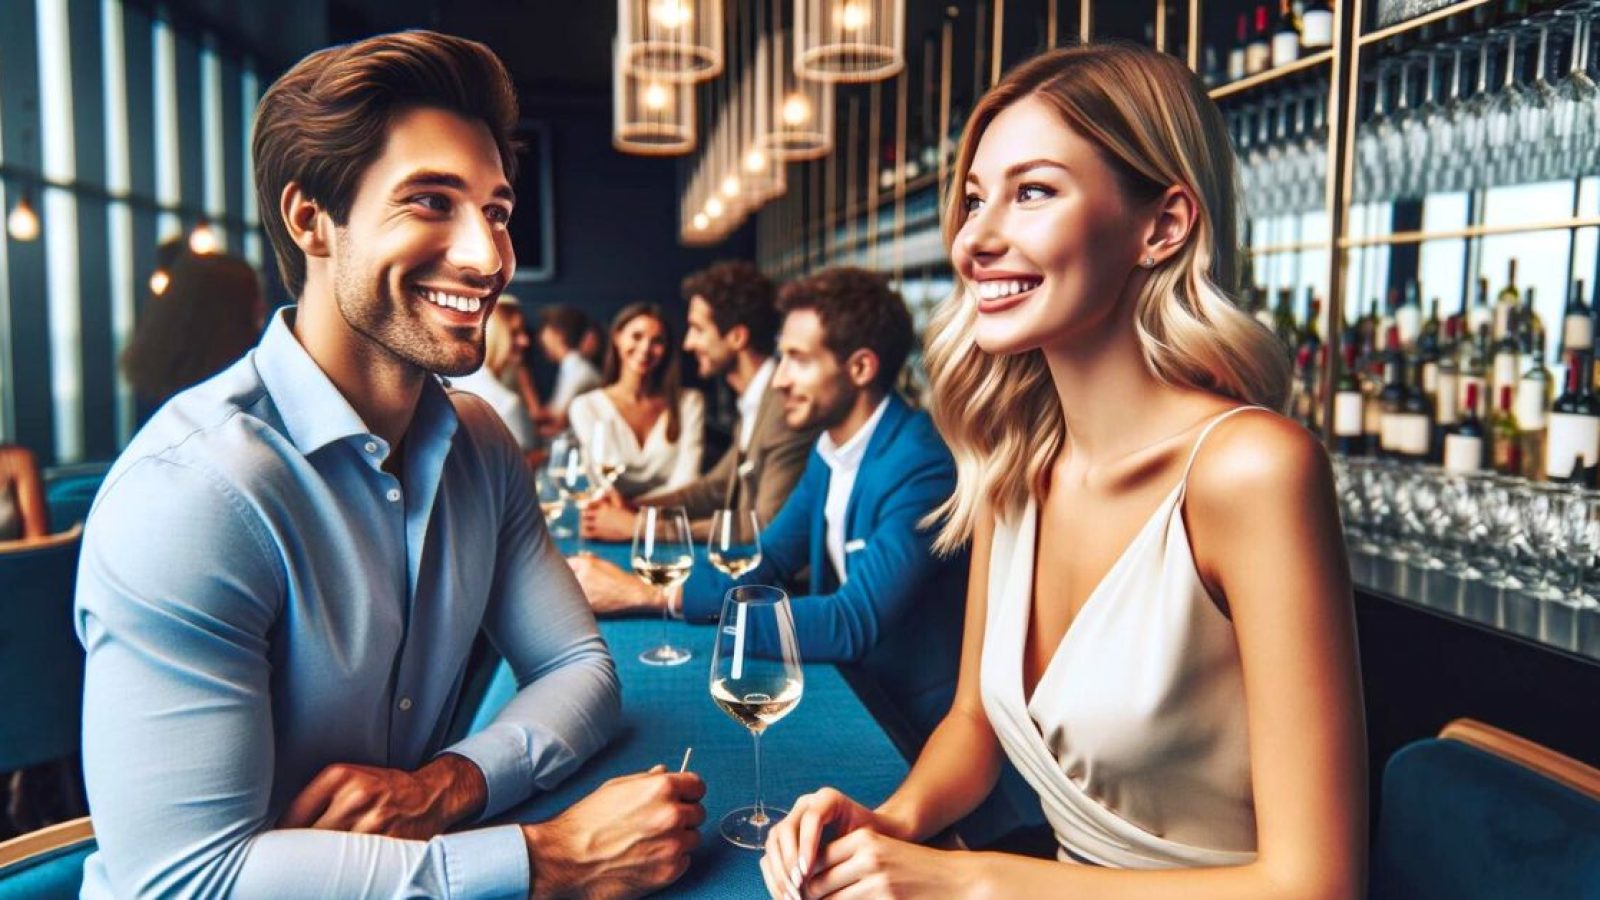 man and woman flirting at a singles event in a bar